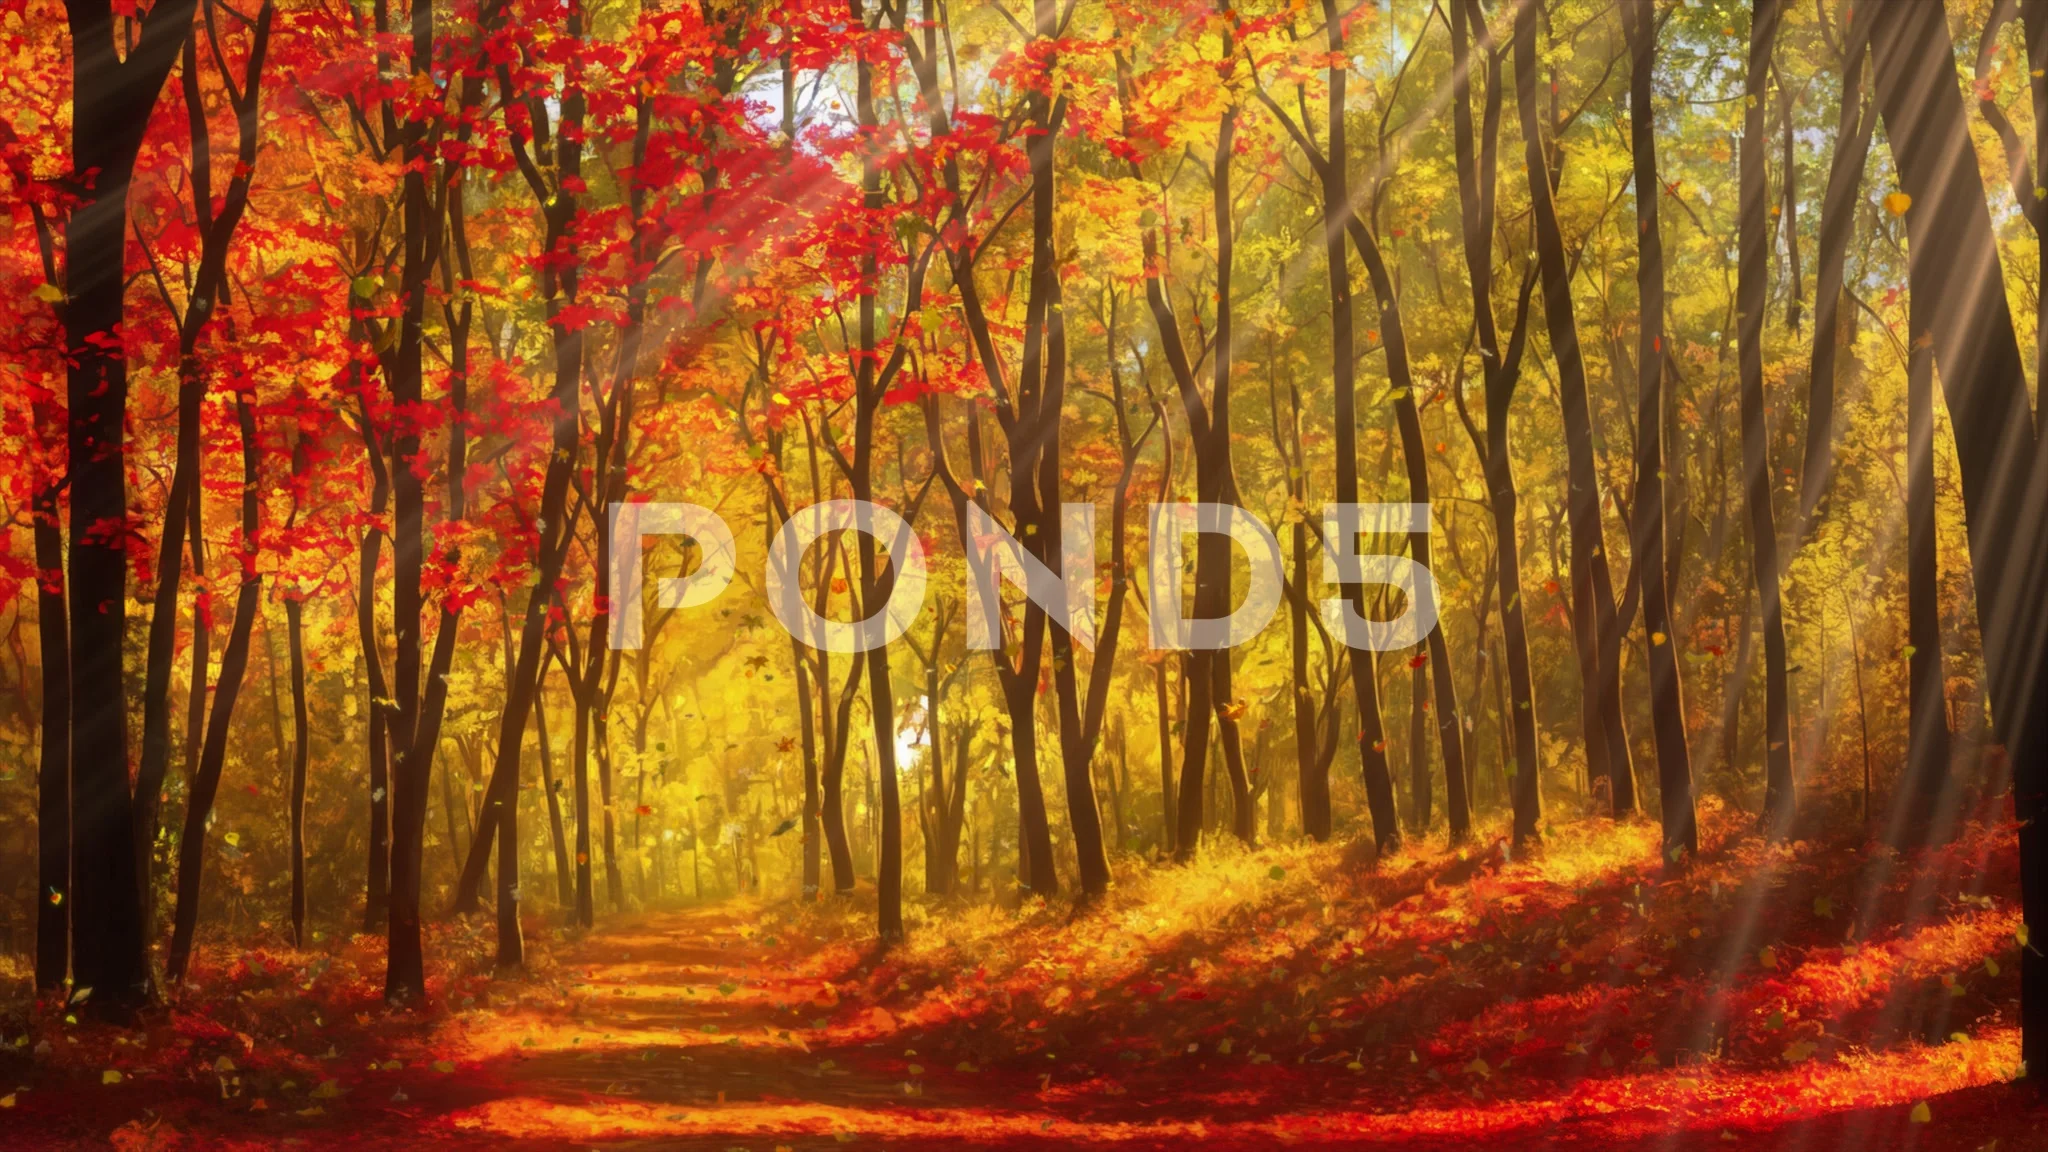 HD wallpaper anime Fall beauty in nature scenics  nature one person   Wallpaper Flare